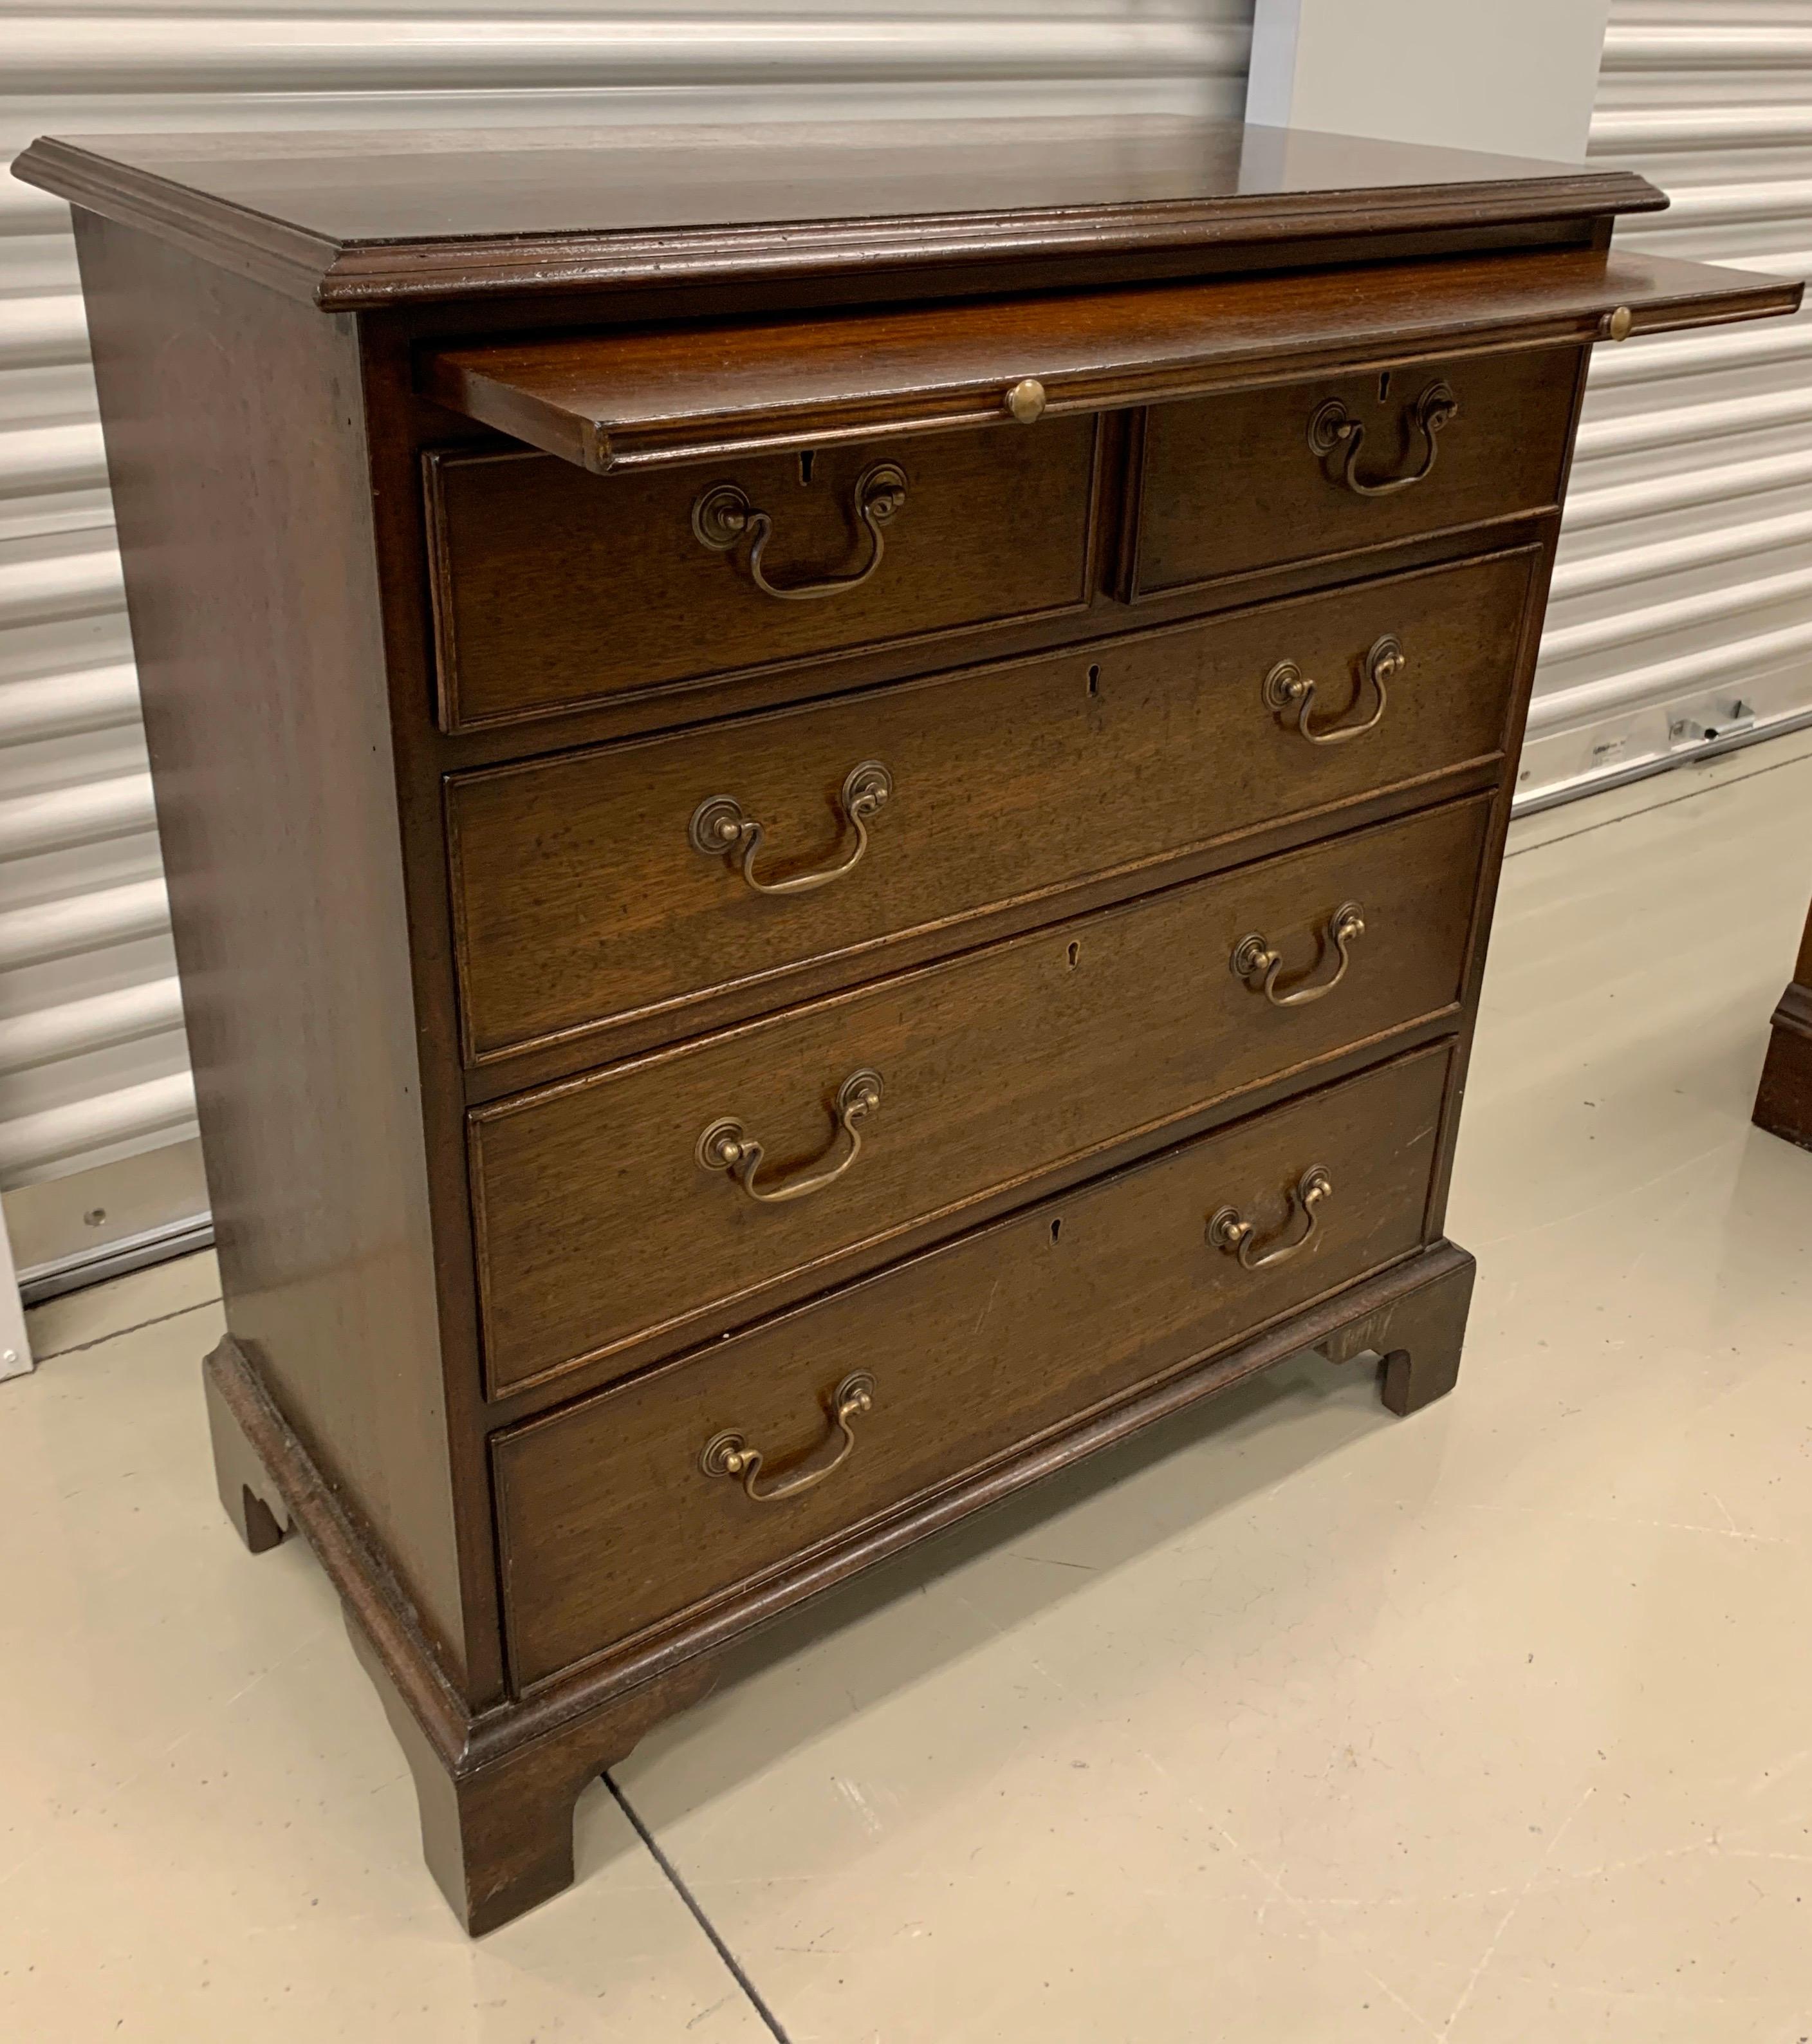 Elegant five-drawer mahogany Federal style commode with an unusual slide out shelf at top that can function as a desk if you so wish.